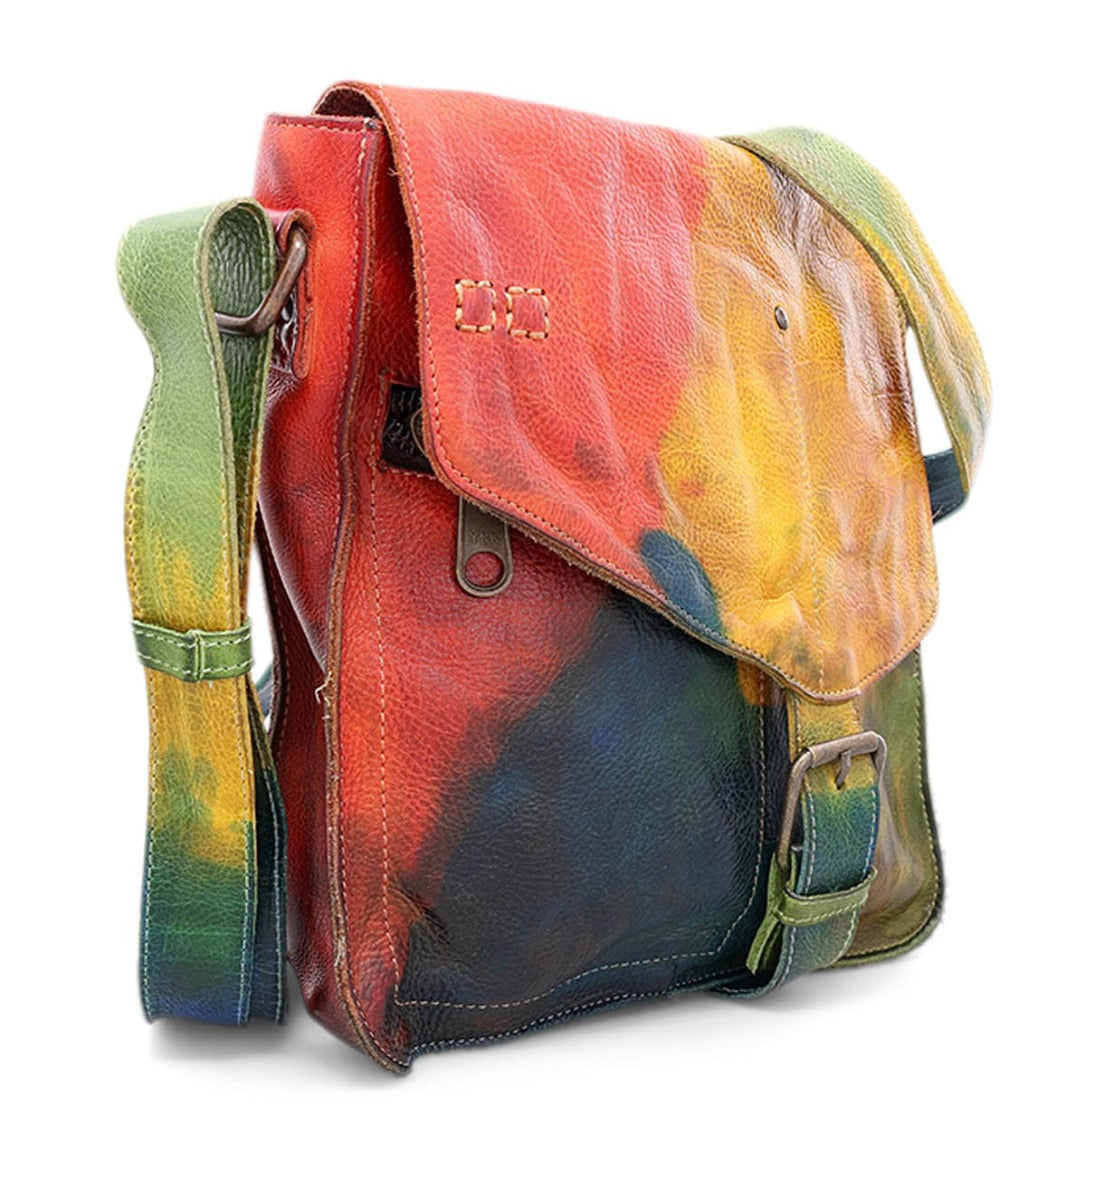 A colorful Venice Beach pure leather messenger bag with a strap from Bed Stu.